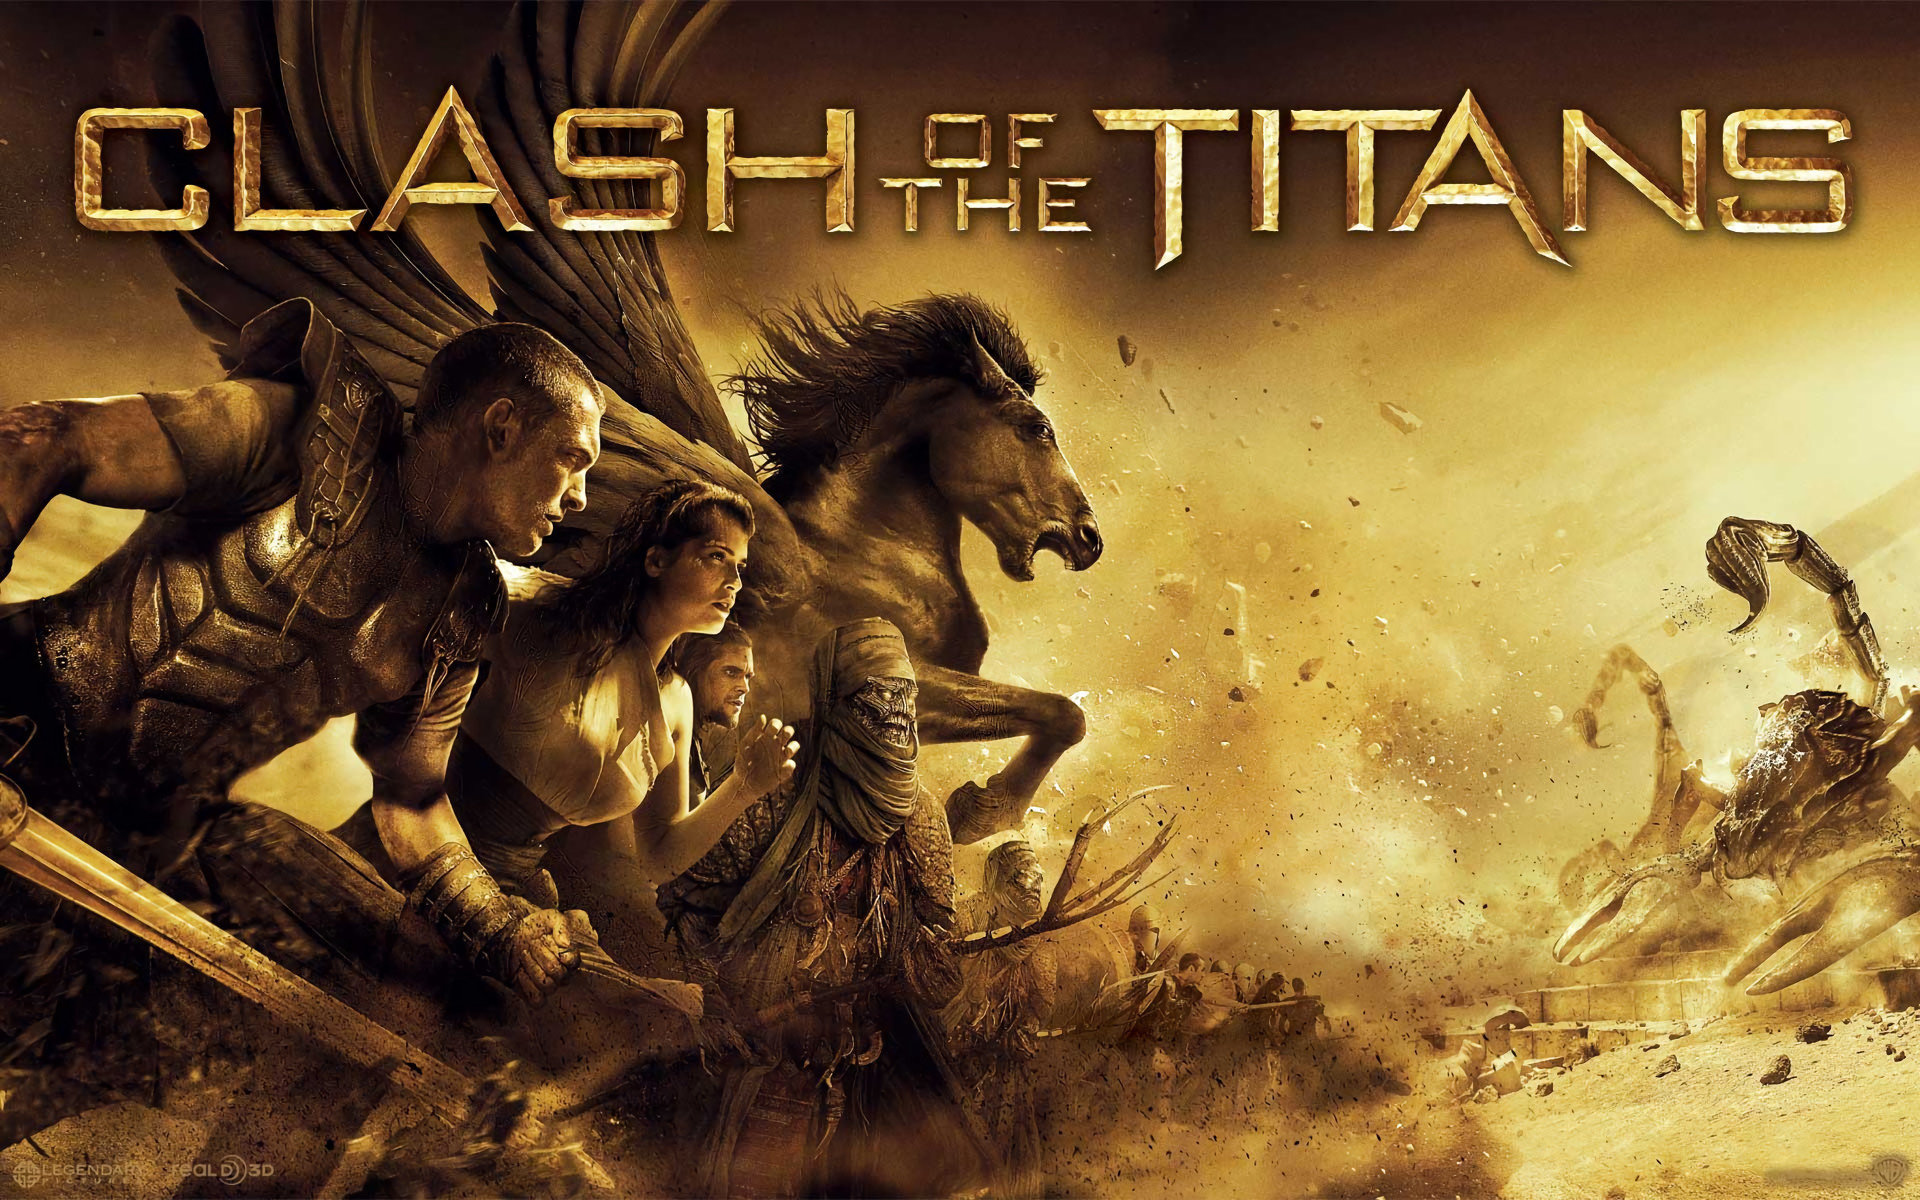 Best Clash Of The Titans (2010) background ID:128639 for High Resolution hd 1920x1200 PC